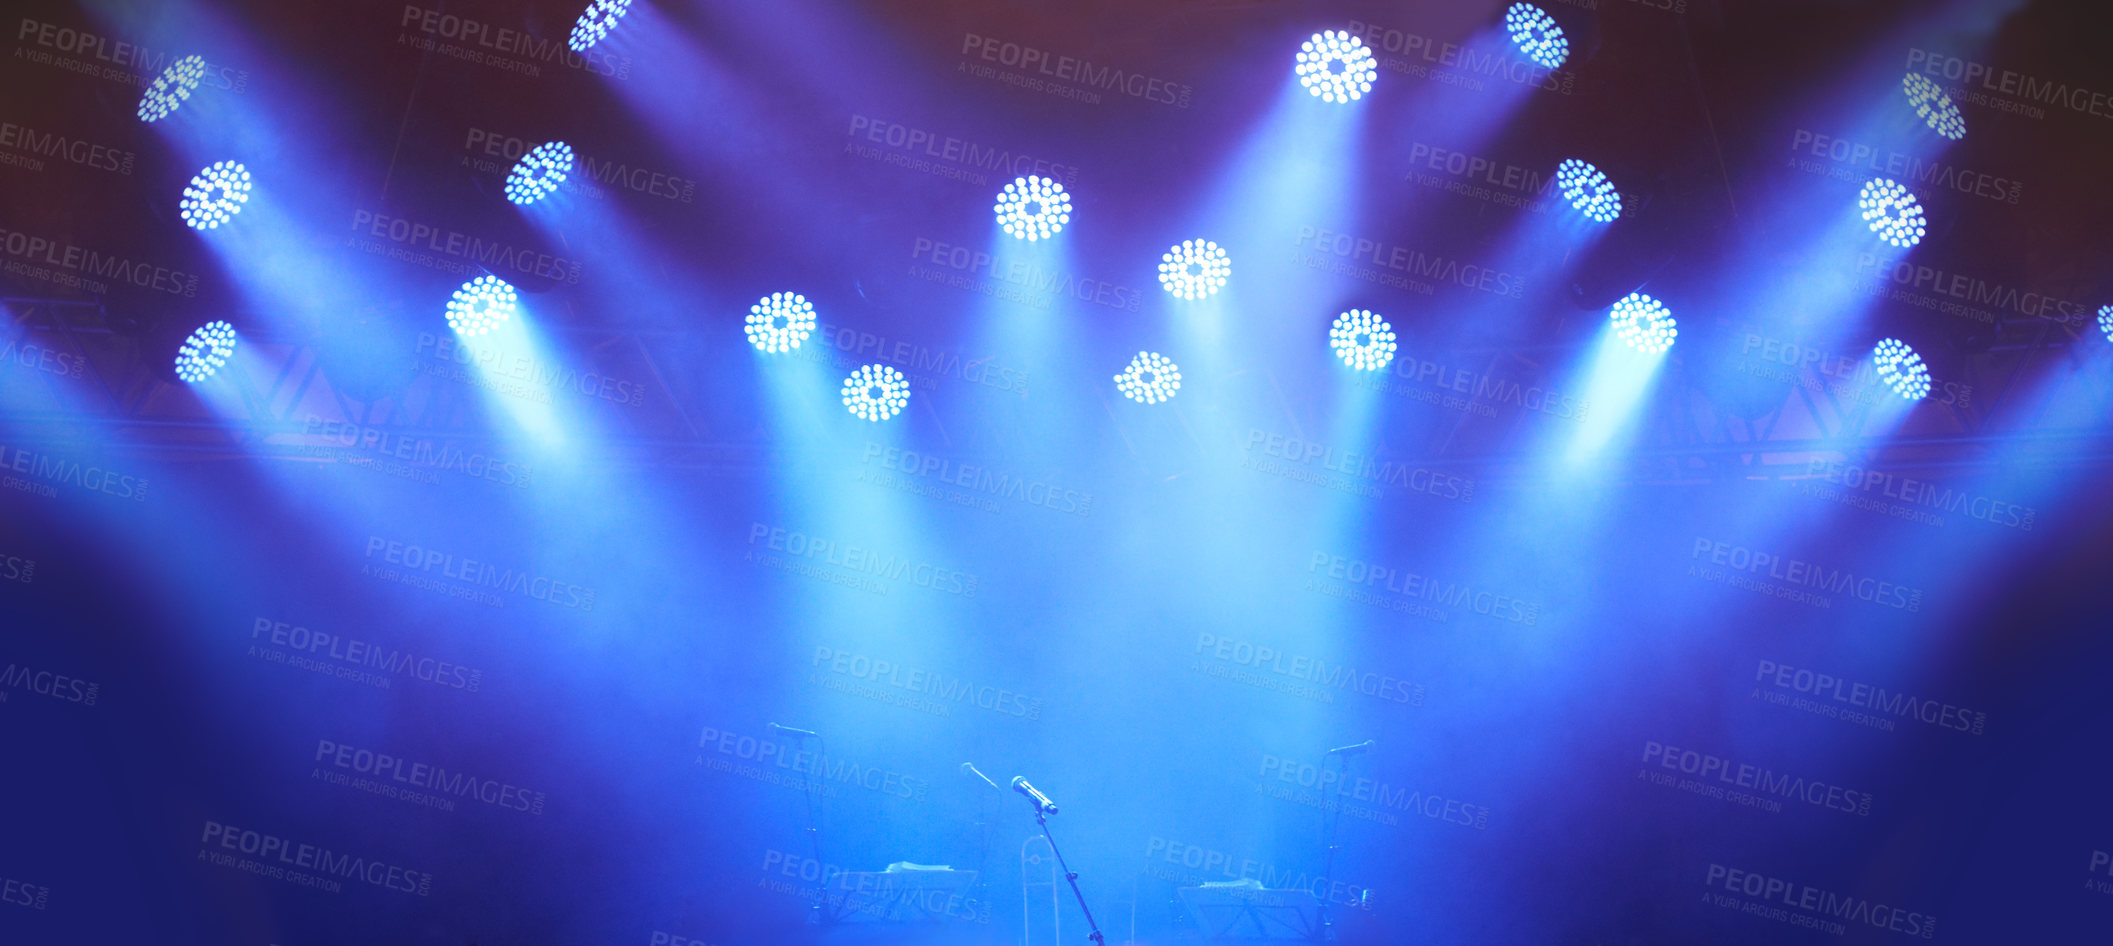 Buy stock photo A stage at a music festival with lights streaming down from above